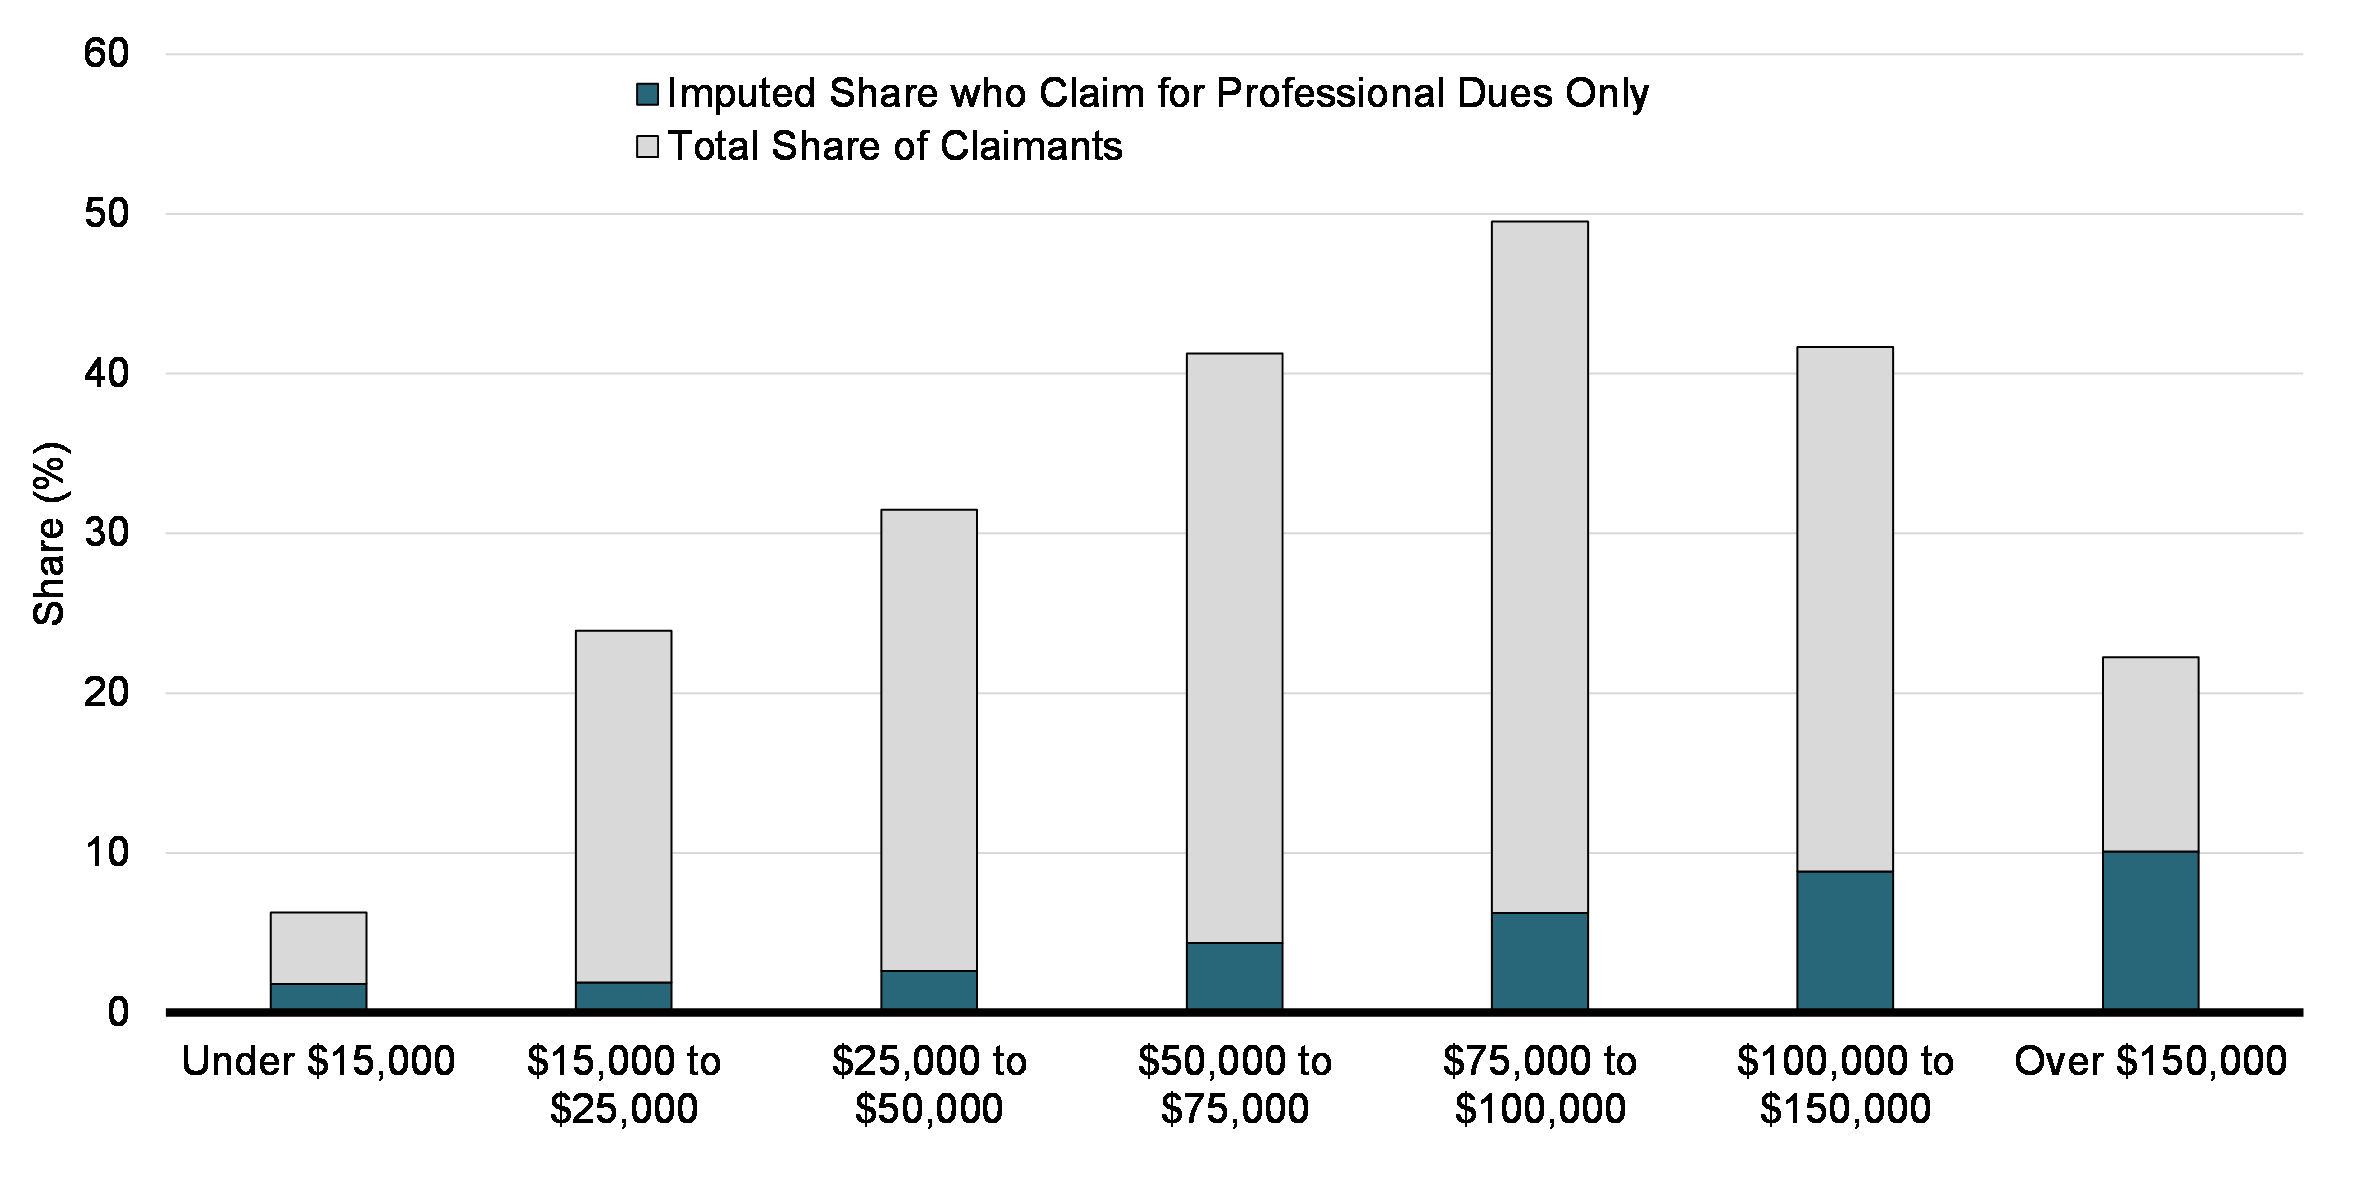 Chart 12: Share of UPD Claimants among Taxfilers and Imputed Share of Claimants of Professional Dues Only among Claimants, by Earnings Group (2019)